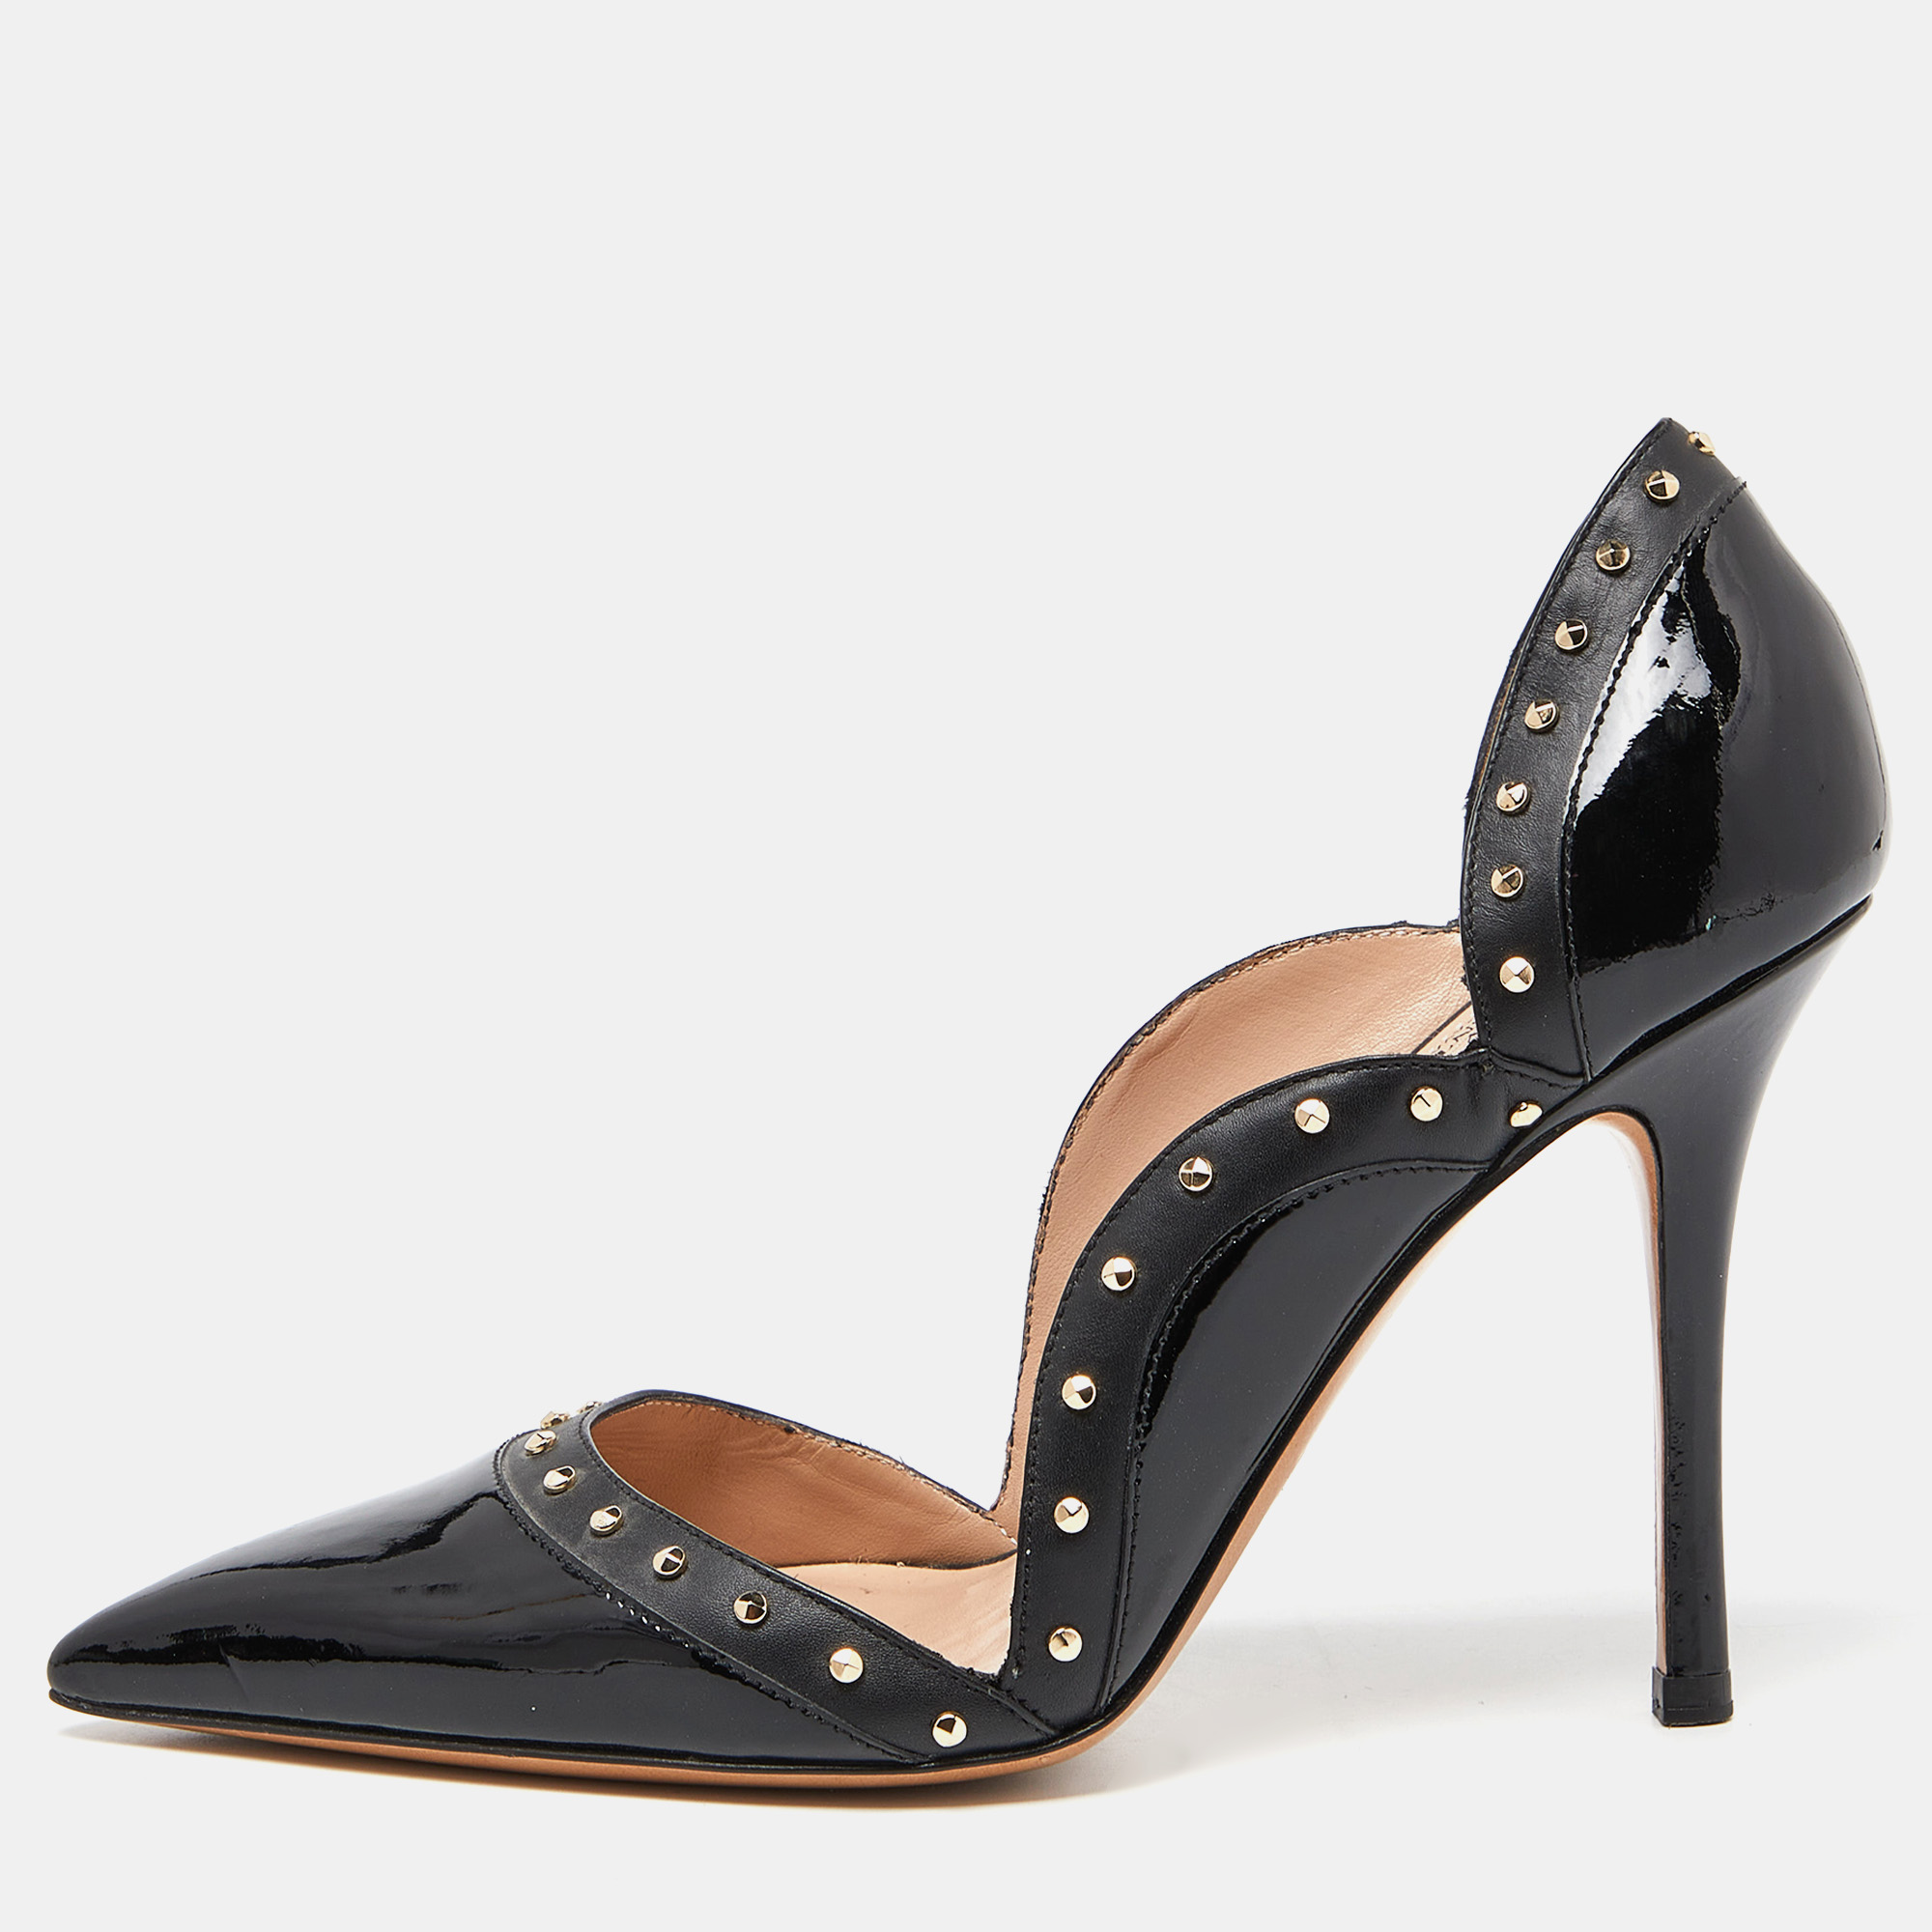 Valentino Black Patent And Leather Studded Pointed Toe Pumps Size 38